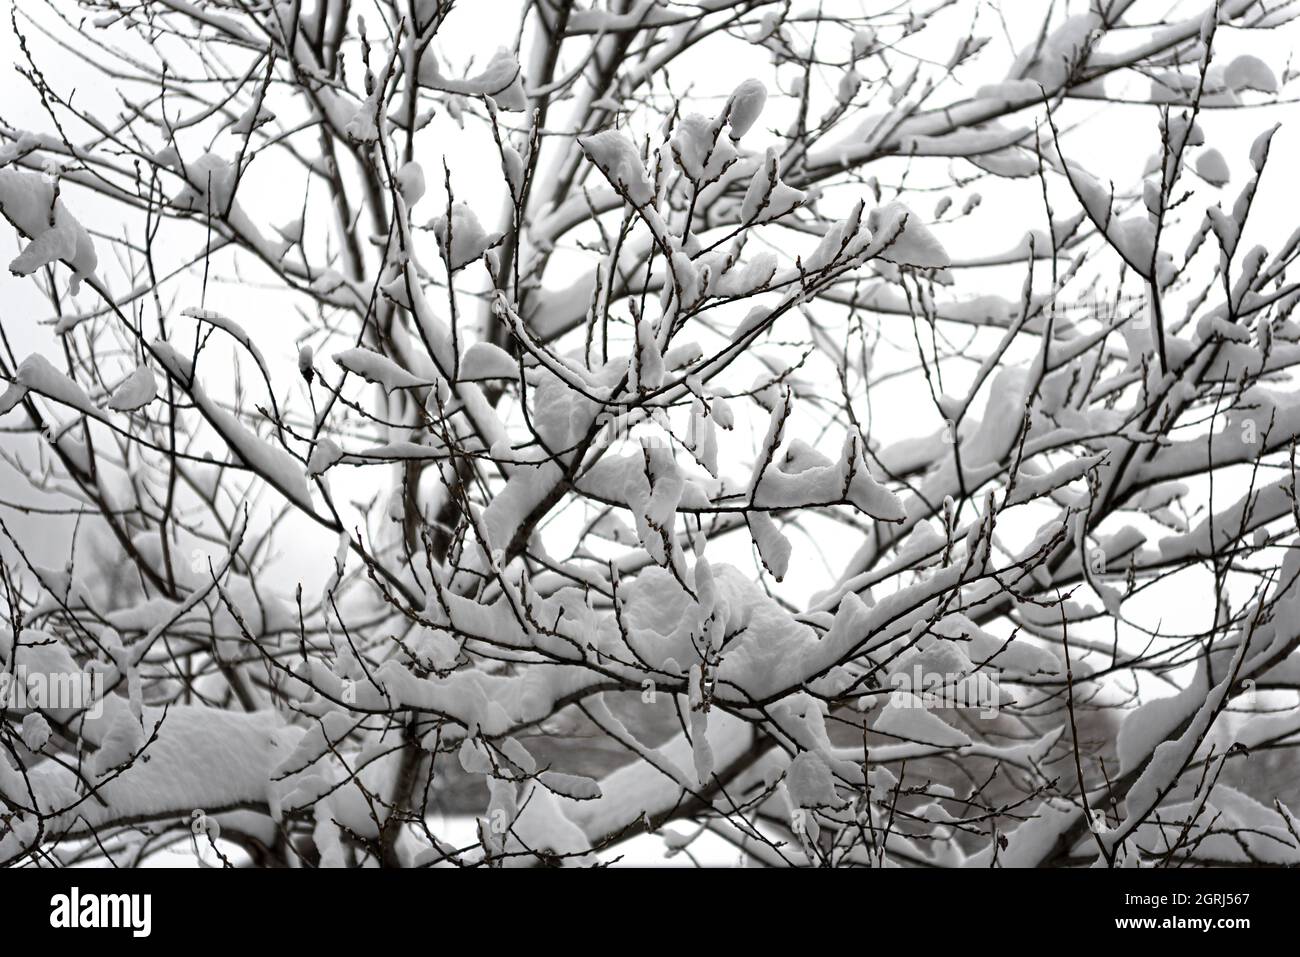 High key lighting close-up of tree branches covered in fresh snow against a grey sky after a winter storm Stock Photo